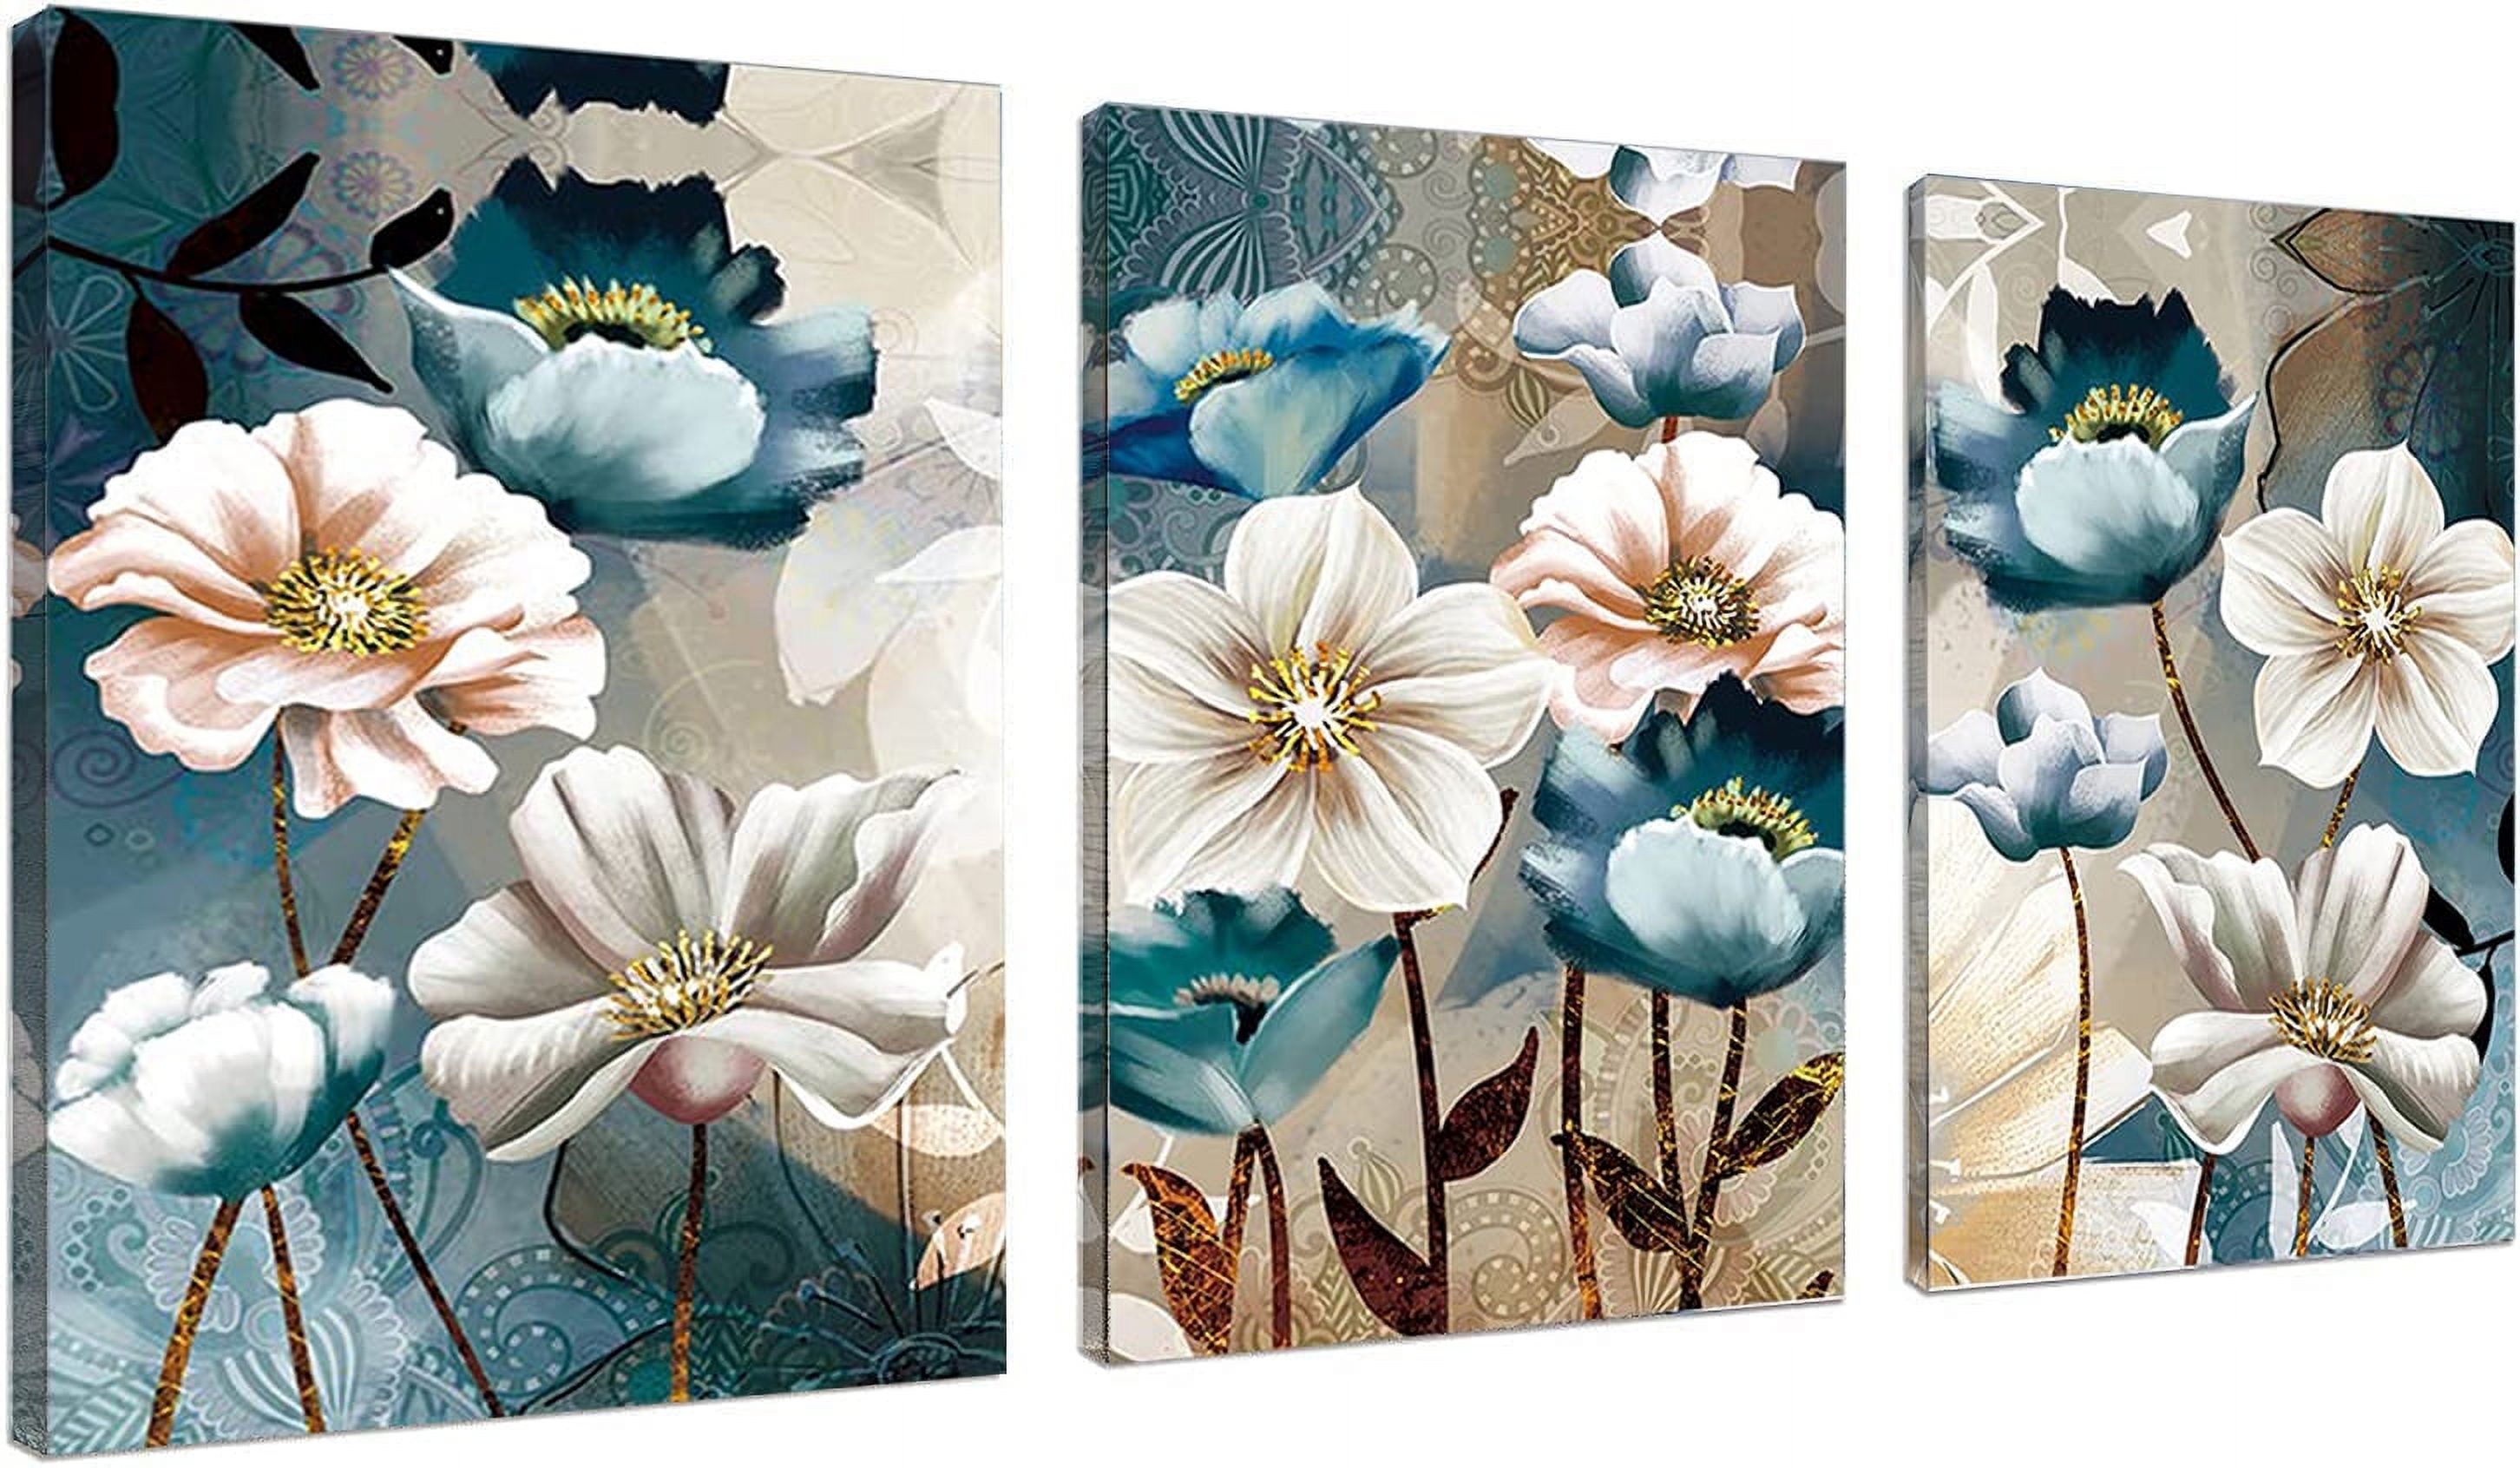 YALKIN 3 Pack Lotus Flowers 5D Diamond Painting Kits for Adults Kids  Beginners DIY Full Round Drill Paint by Diamonds Kits for Home Wall Decor  11.8x15.7in 